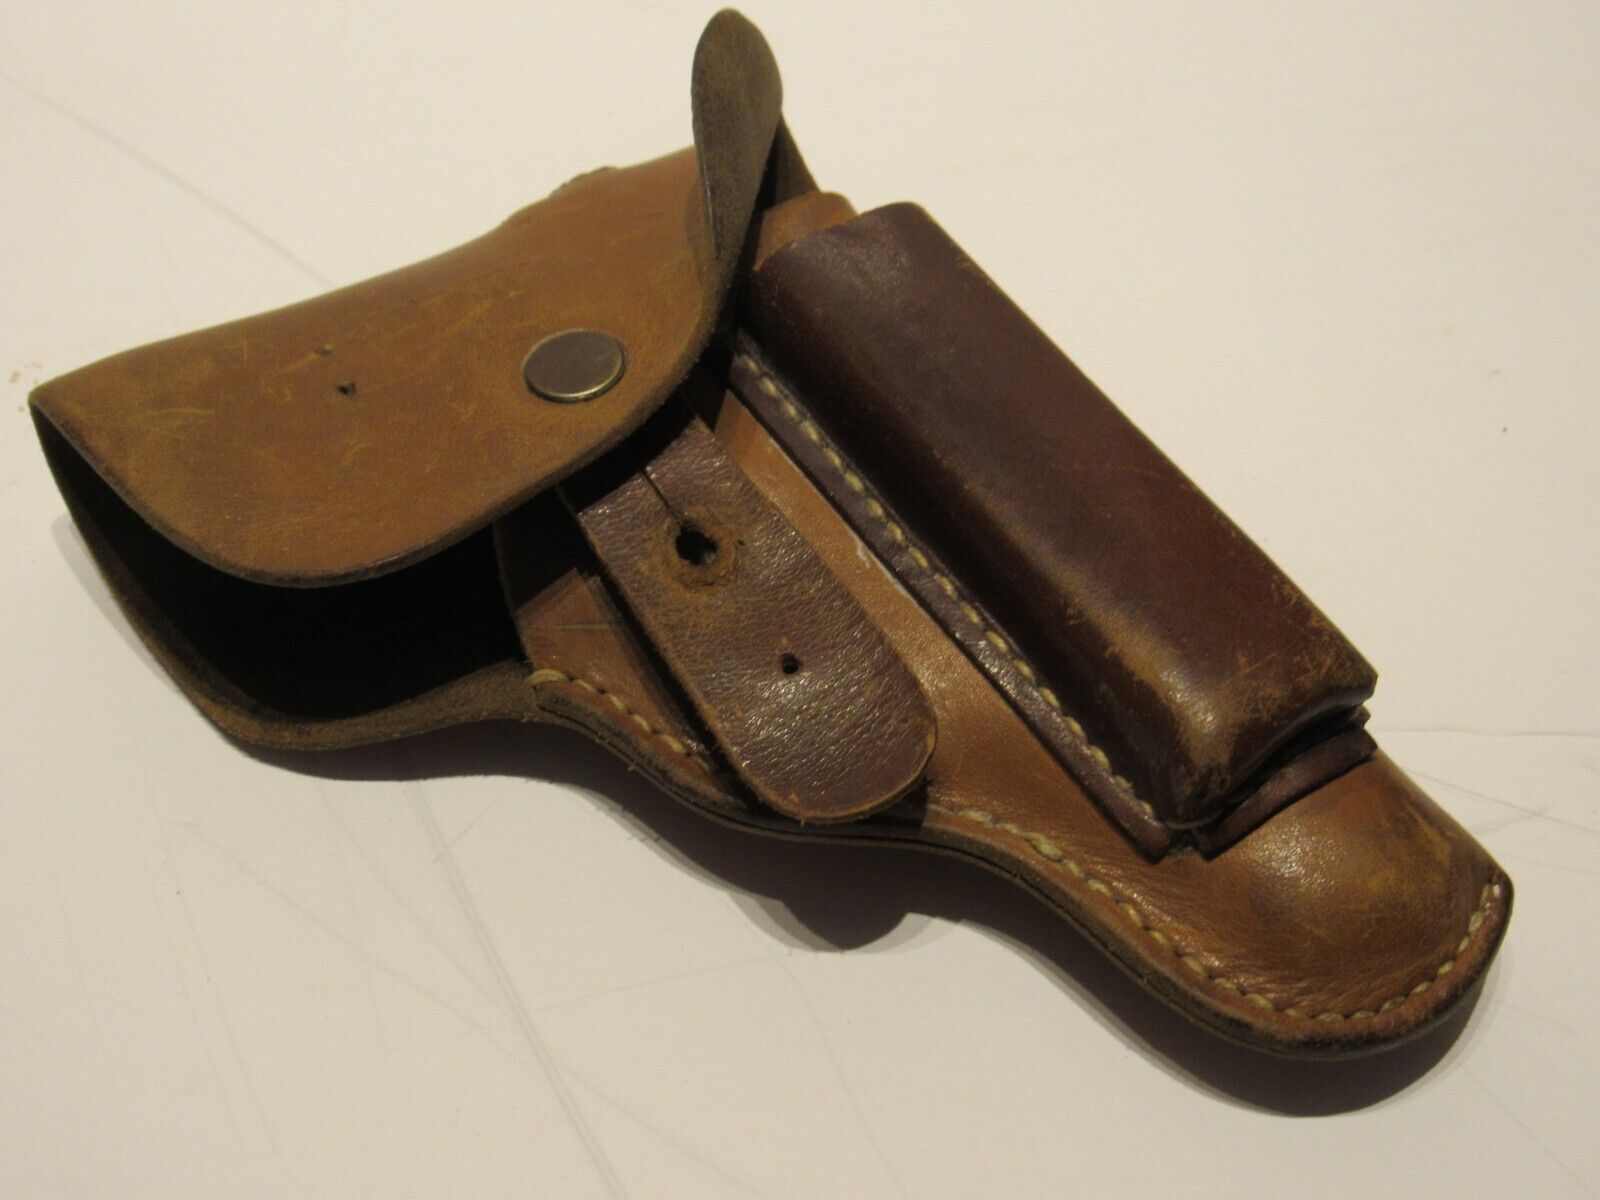 WWII German Brown small pistol holster, fits many pistols, CZ27/38H/similar